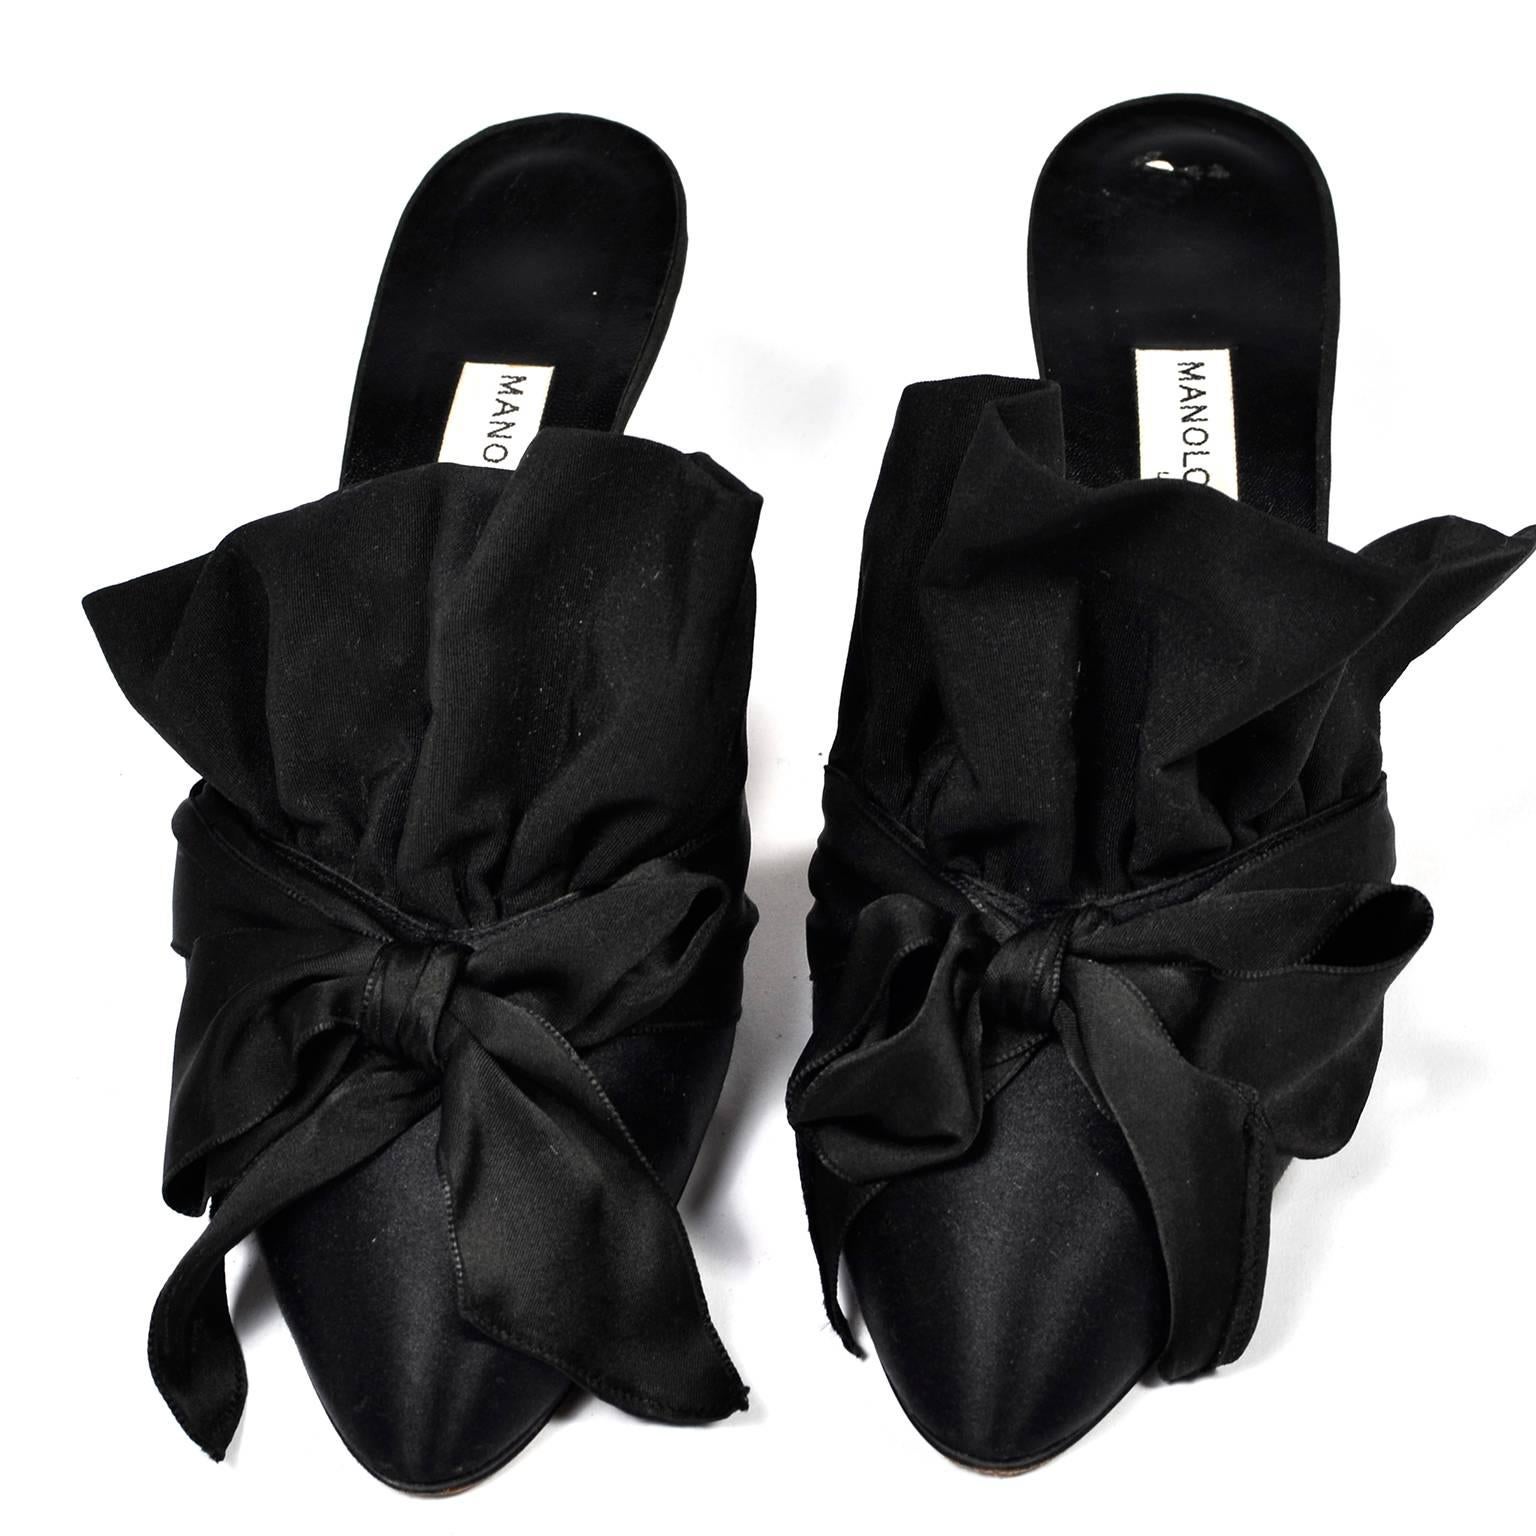 These are rare 1980s Victorian inspired Manolo Blahnik mules with ruffles in size 39.5.  These fabulous black satin shoes have 3" heels, and measure 3" at widest part of the outside of the soles.  We love the bows and the flare heel!